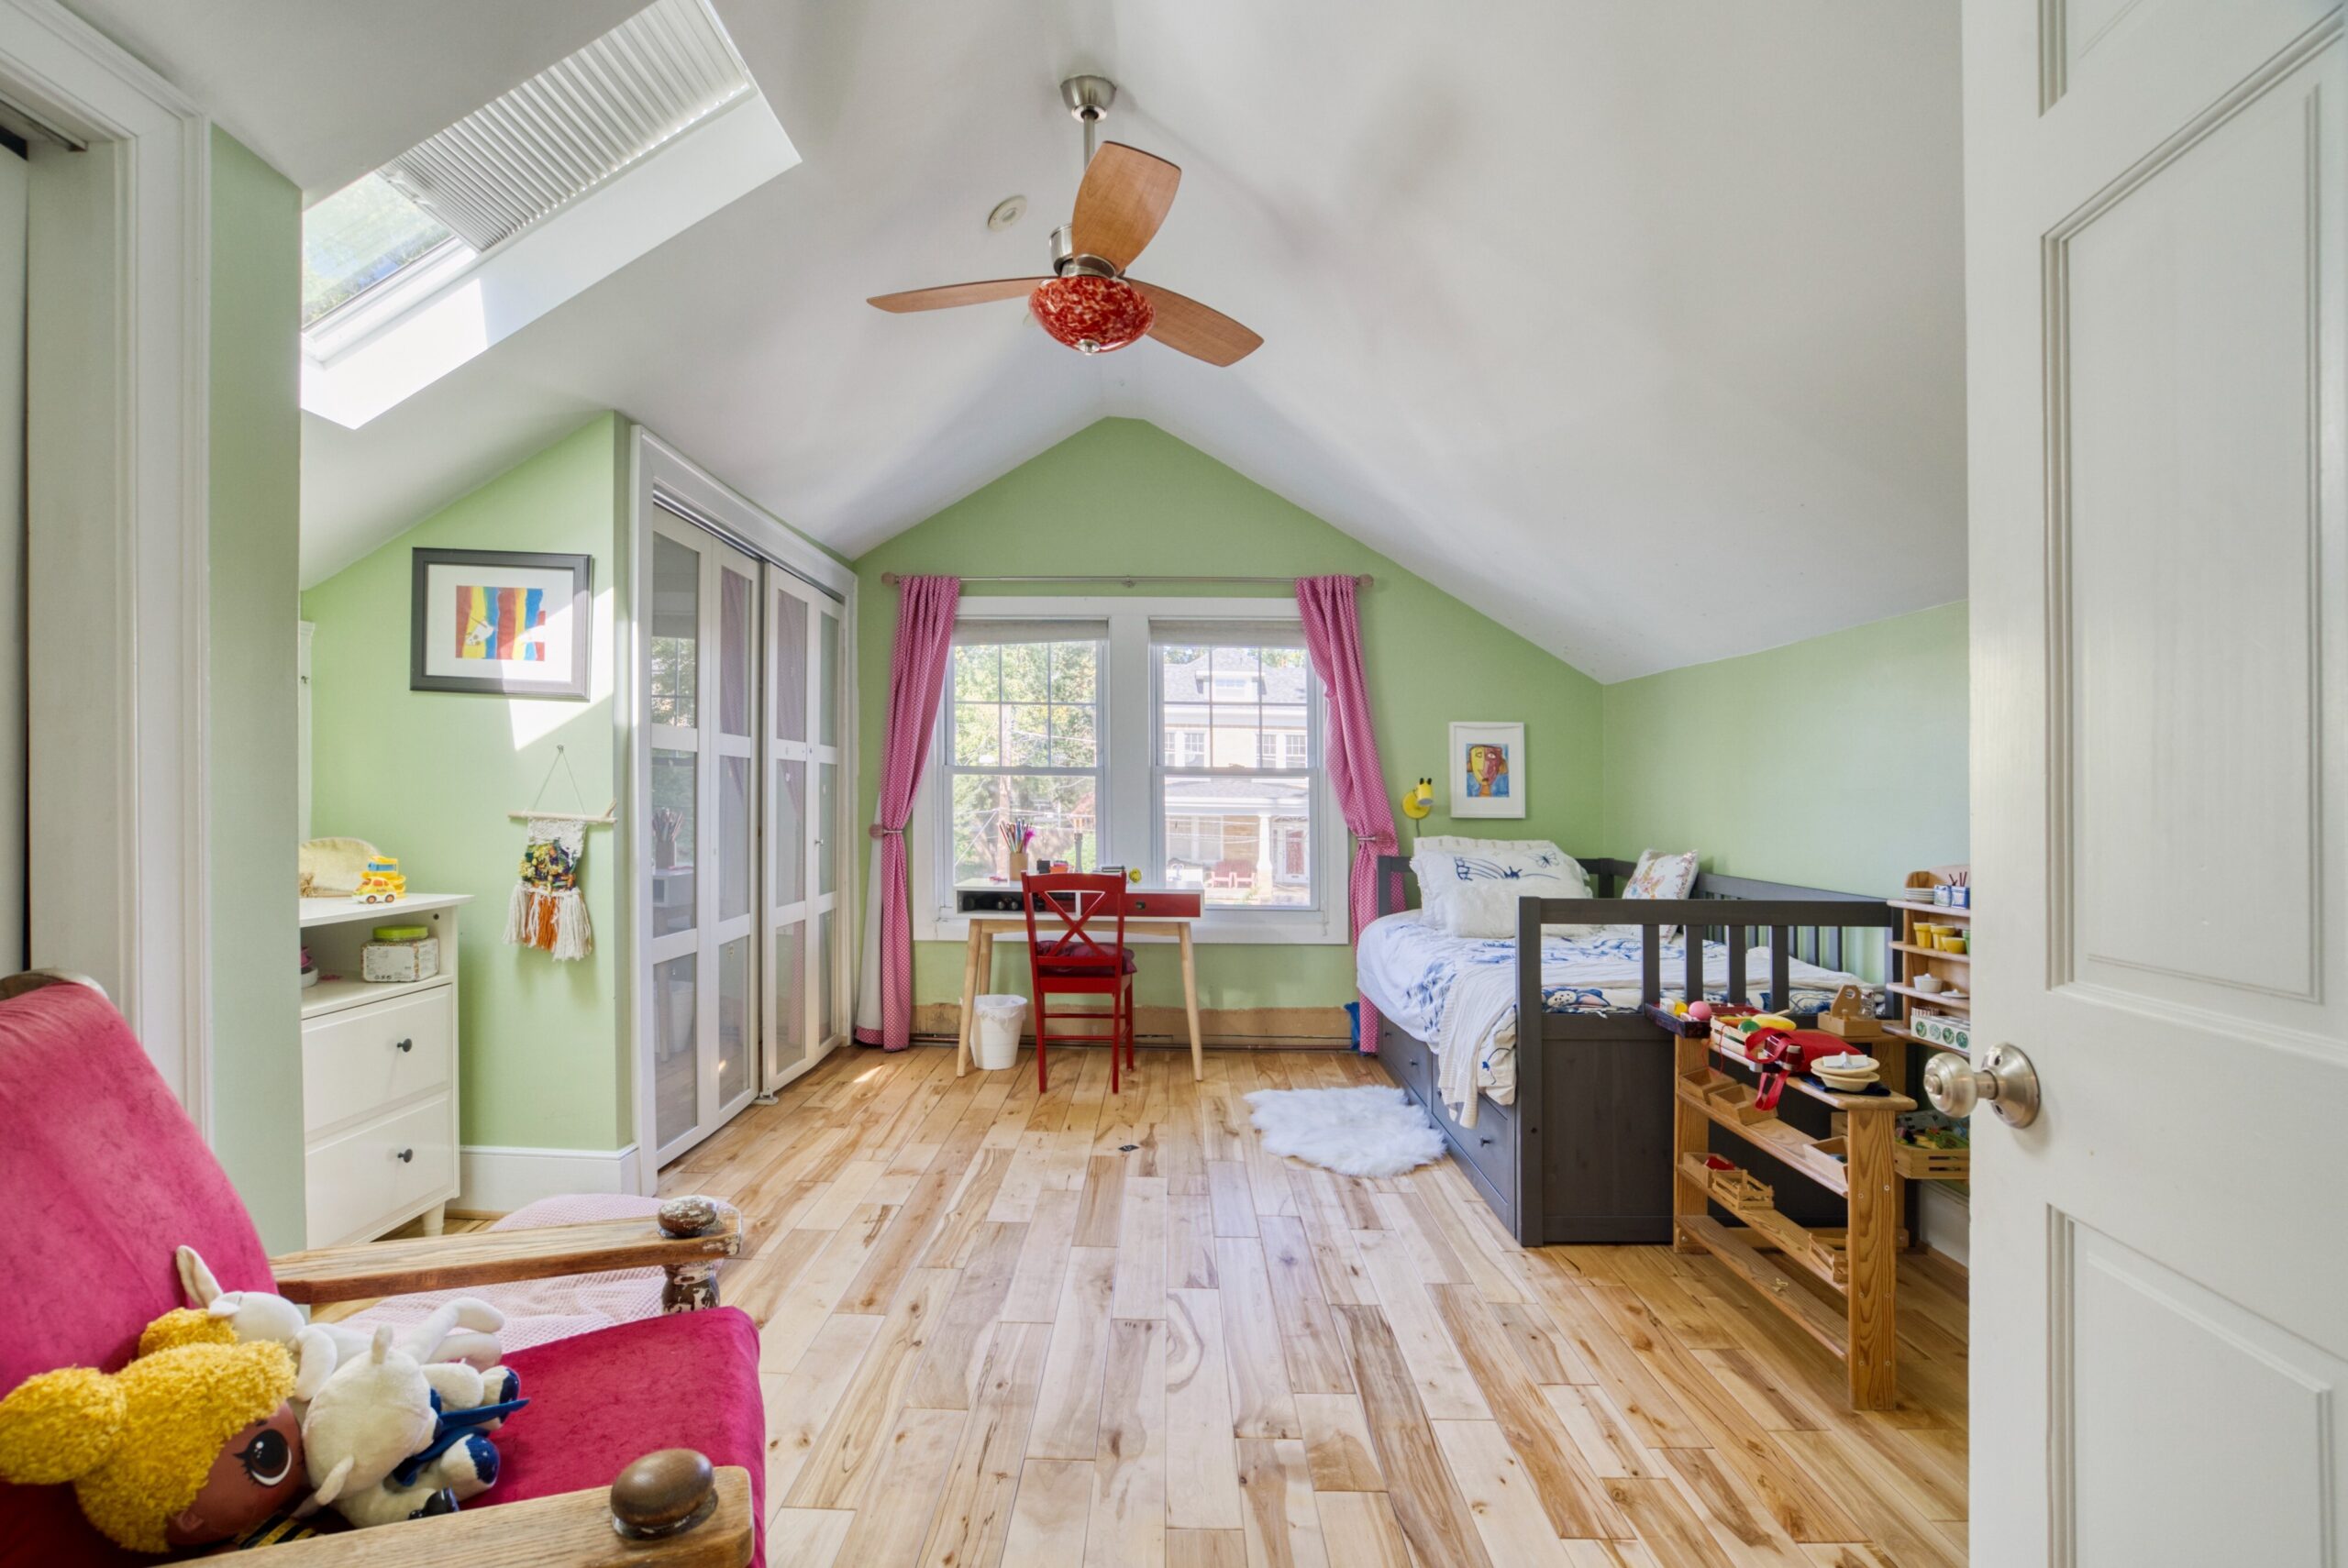 Interior professional photo of 1826 Varnum St NW - showing a bedroom/playroom with vaulted ceiling, skylight, hardwood floors, and a nook with ceiling fan